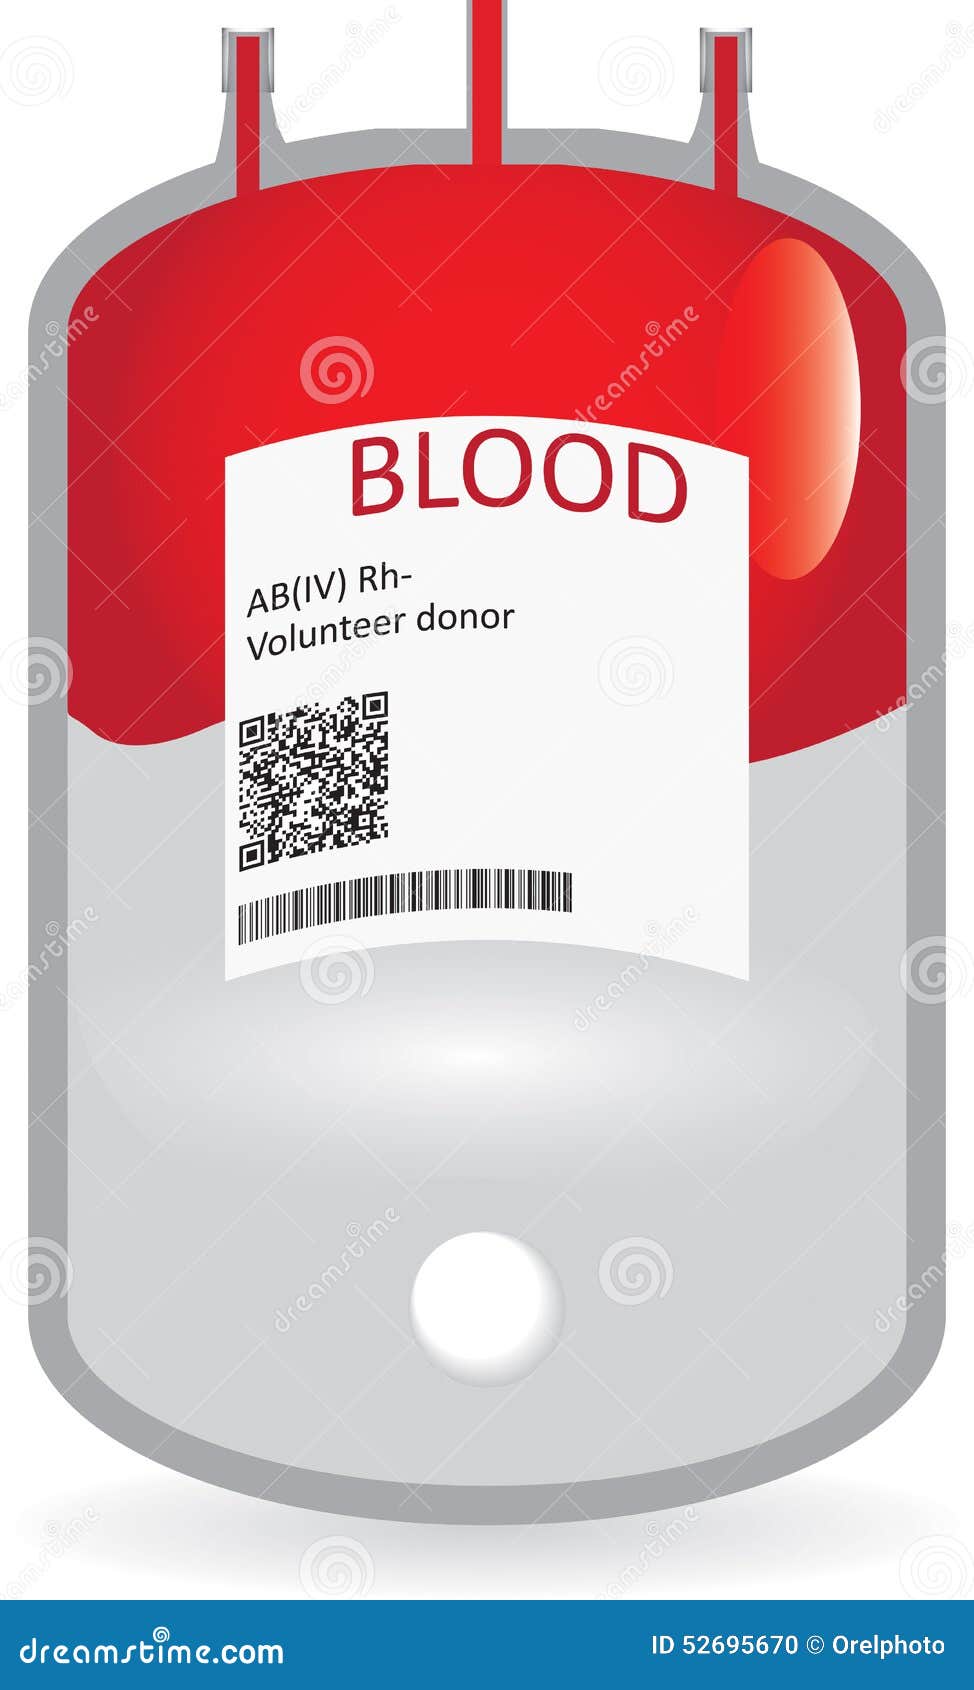 blood bank clipart - photo #3